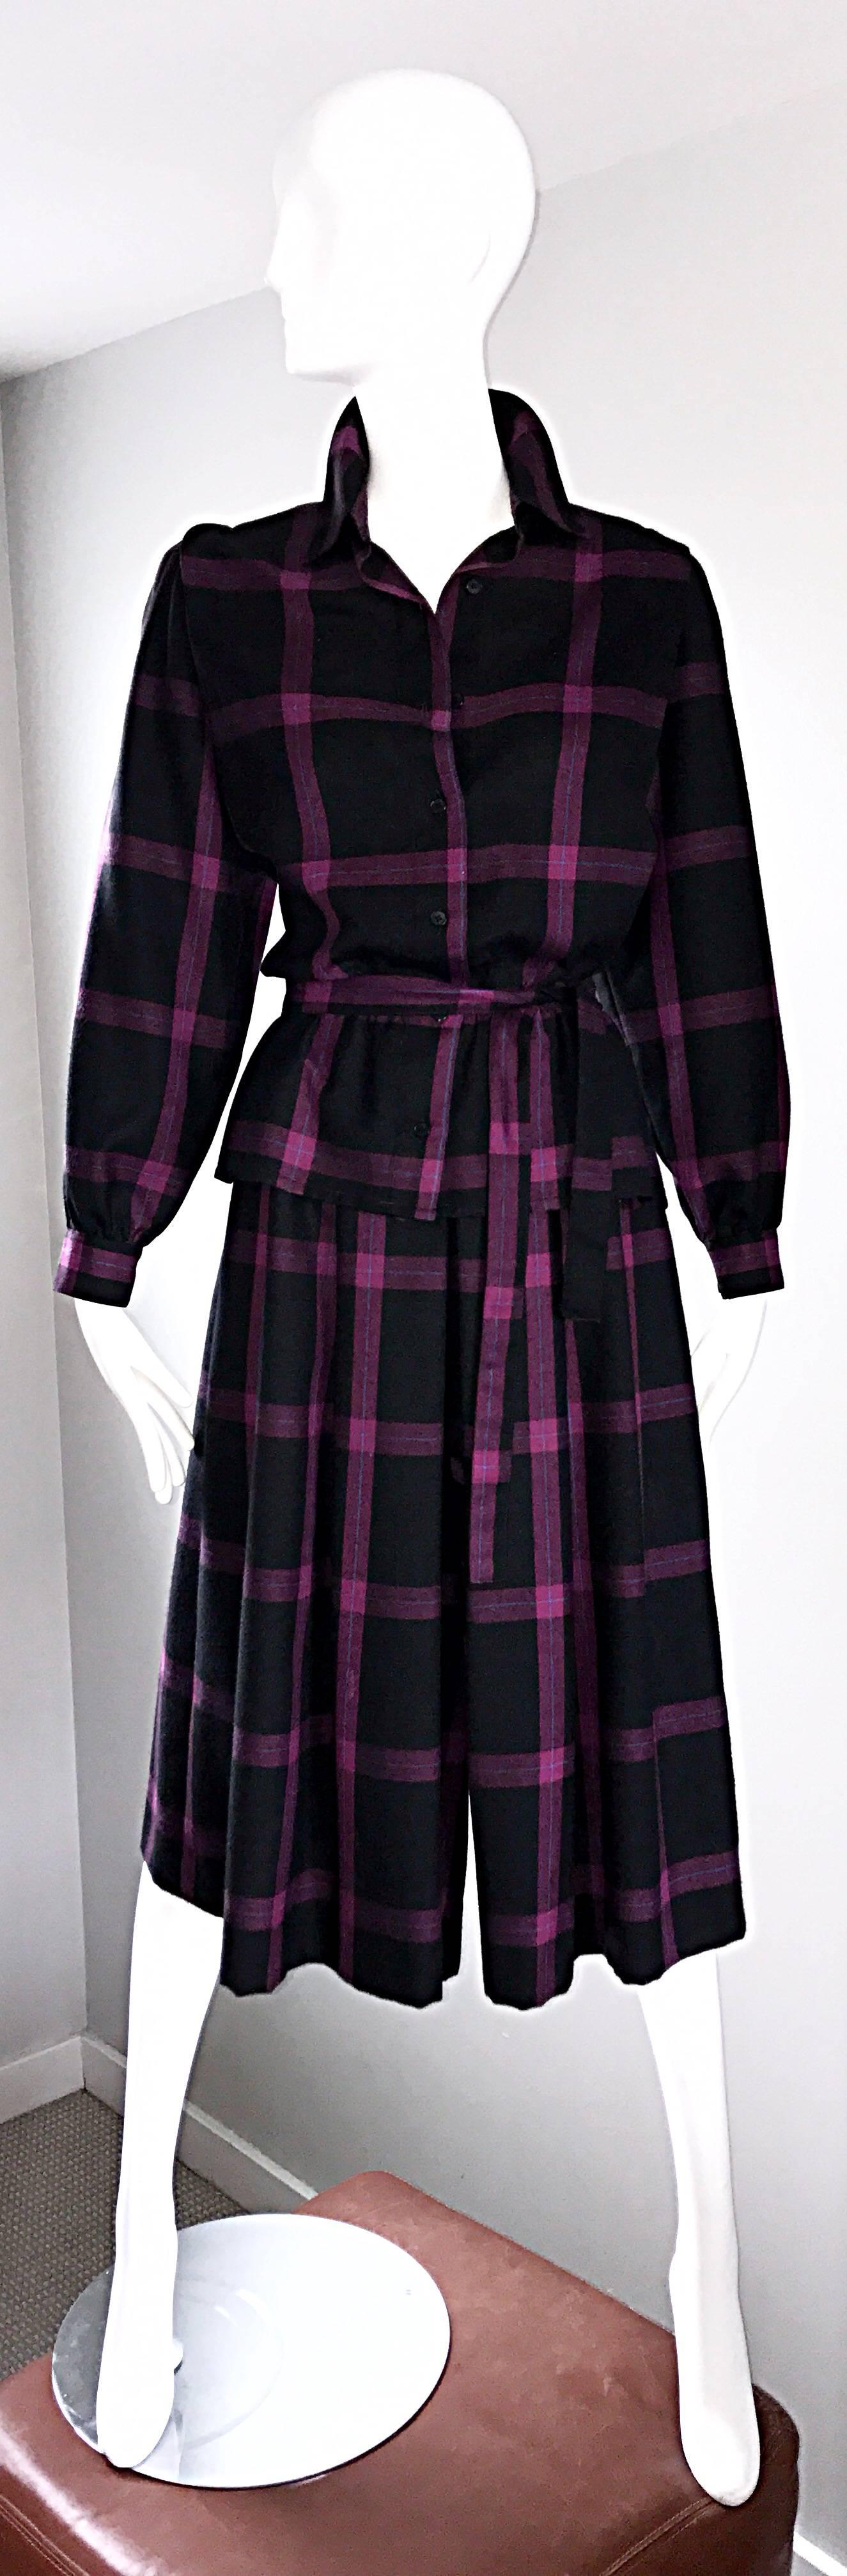 Chic vintage GUY LAROCHE virgin wool fuchsia pink and black windowpane plaid shirt, cropped wide leg culottes pants, and sash belt! Super soft wool feels amazing against the skin. Buttons up the bodice. Sleek tailored bodice features an elastic